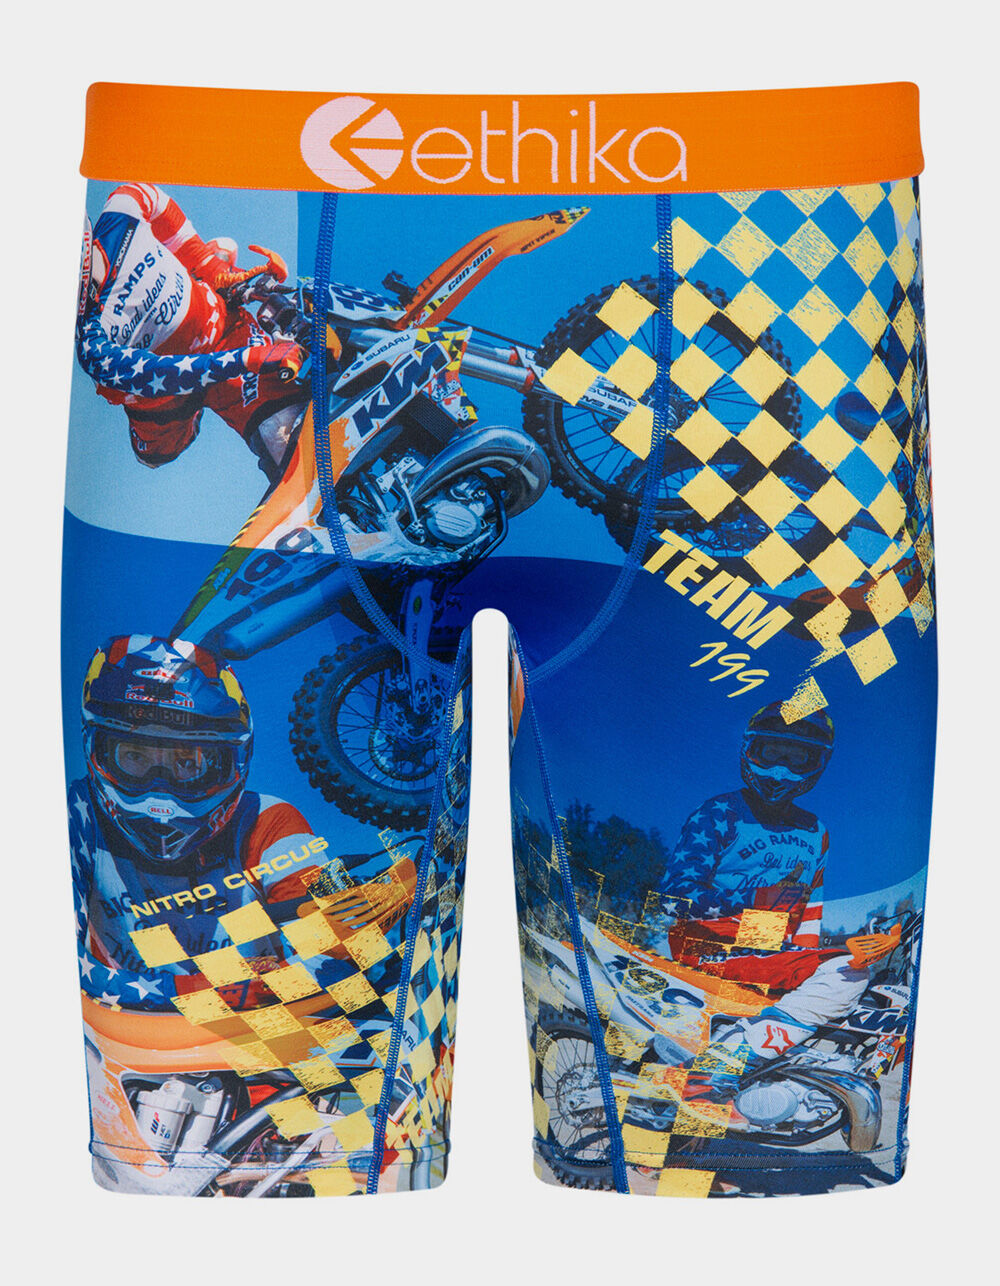 Done with Ethika. Need some advice for better Chonies. - Moto